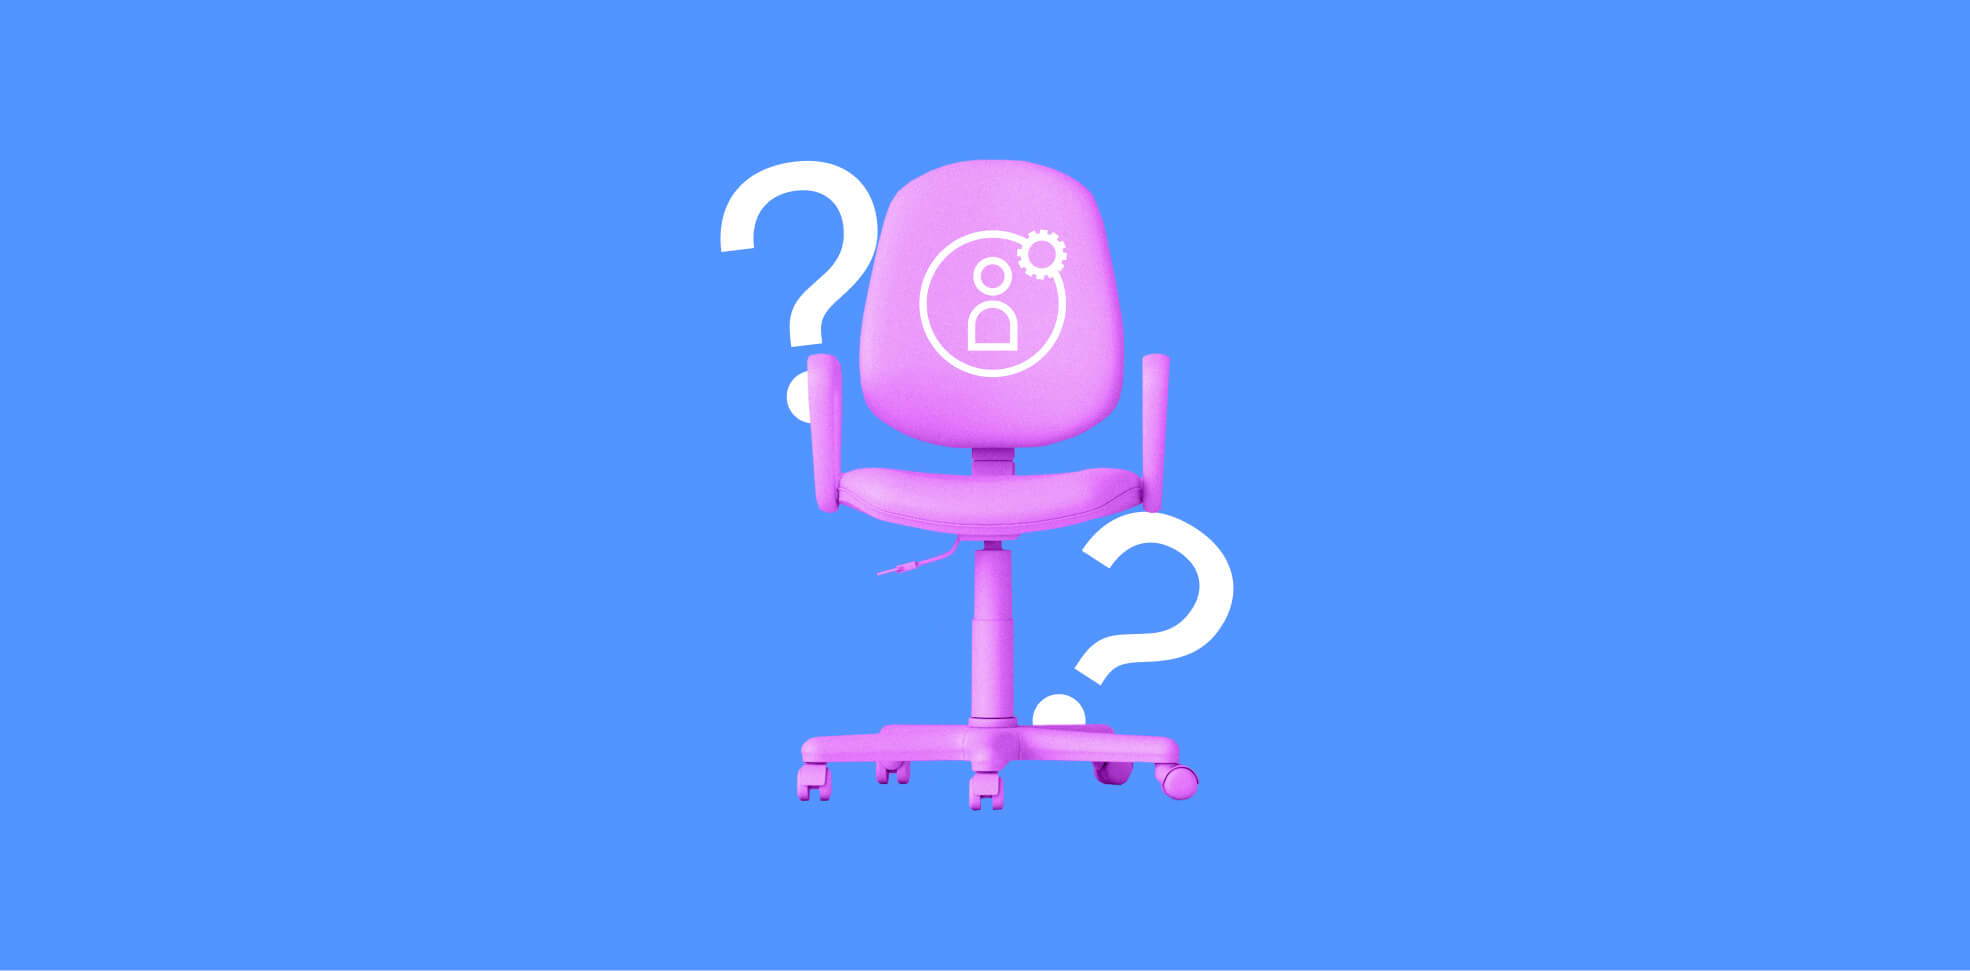 question marks on a chair on a blue background